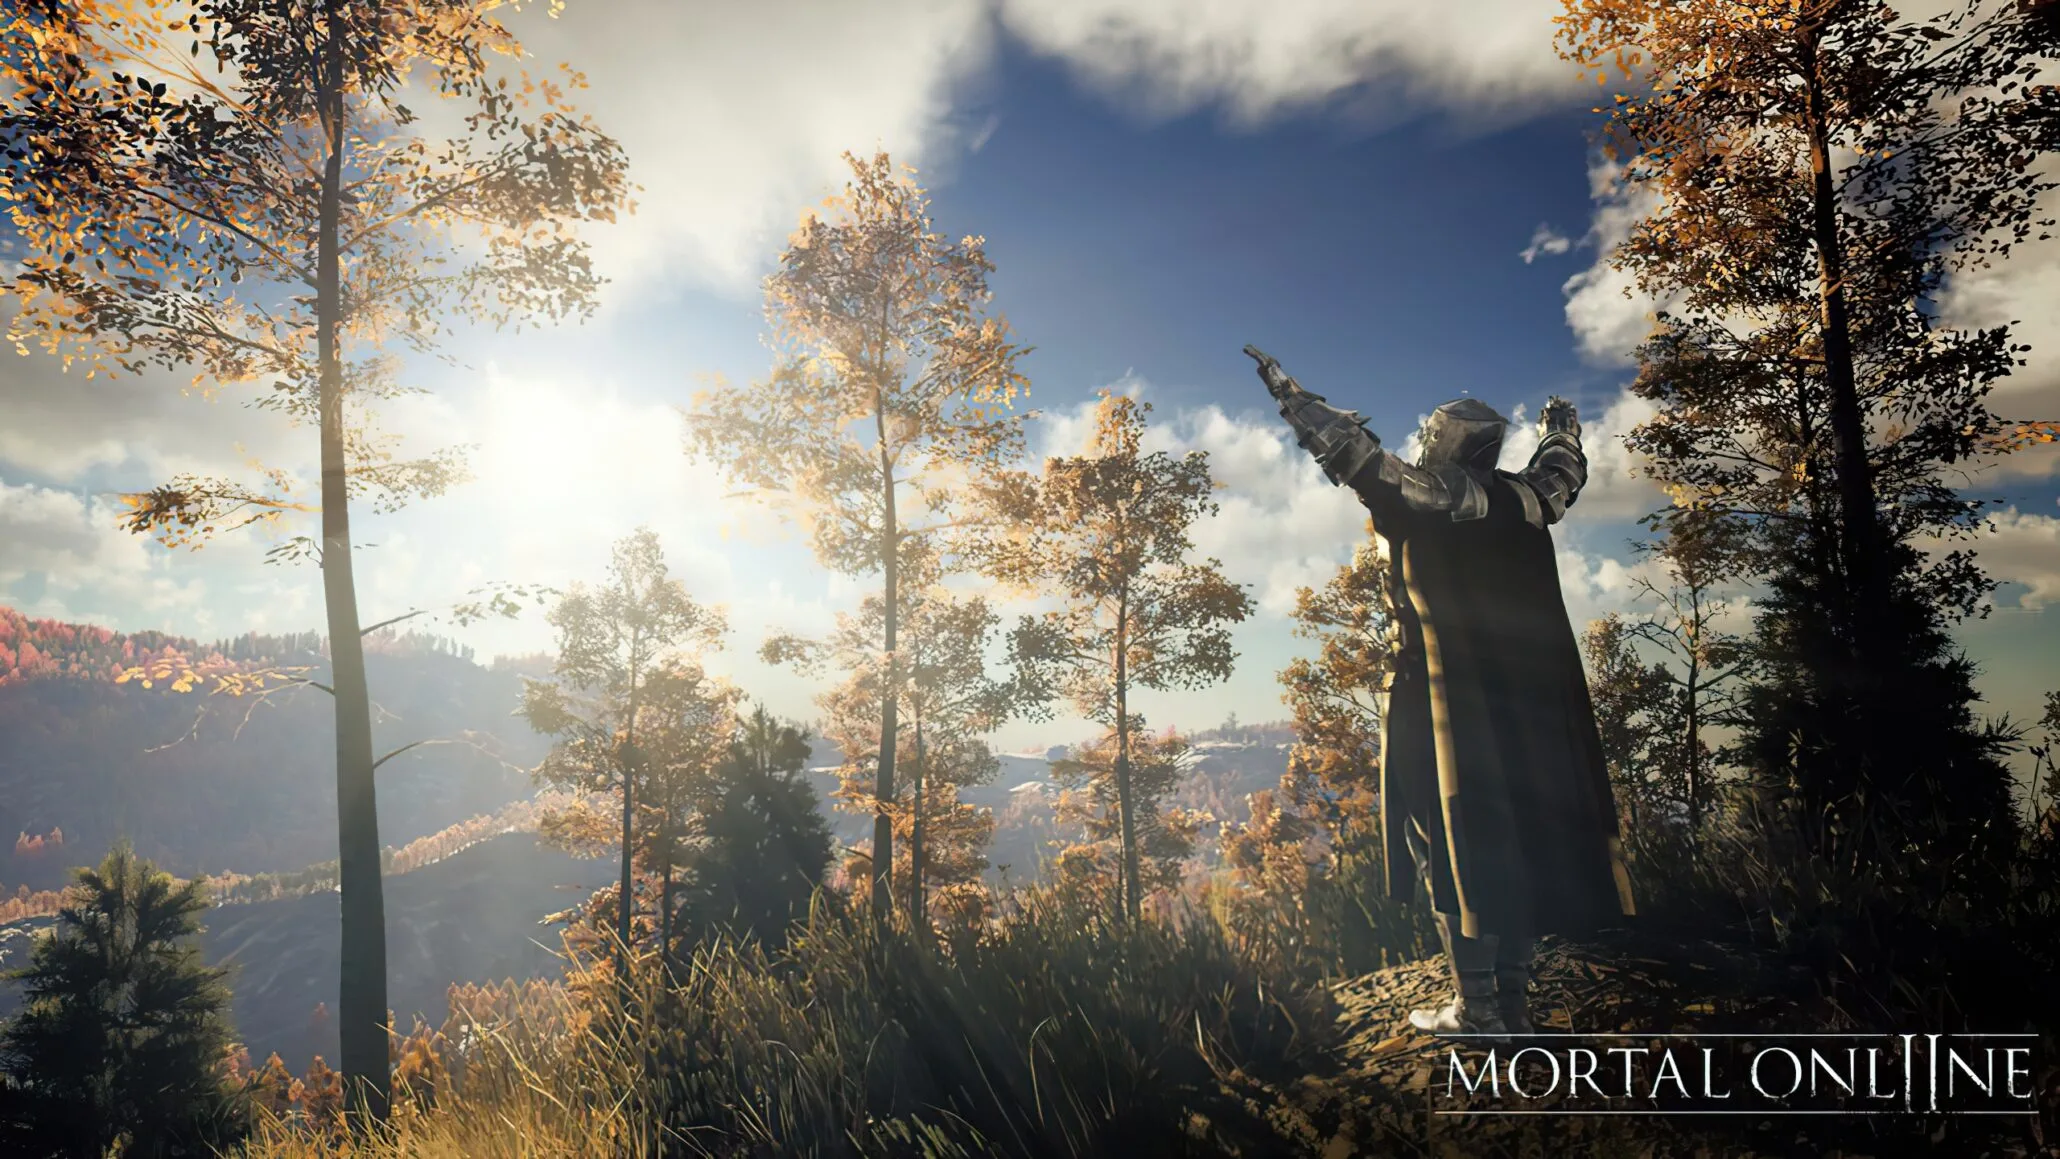 Mortal Online 2 Early Access is Now Available on Steam 7